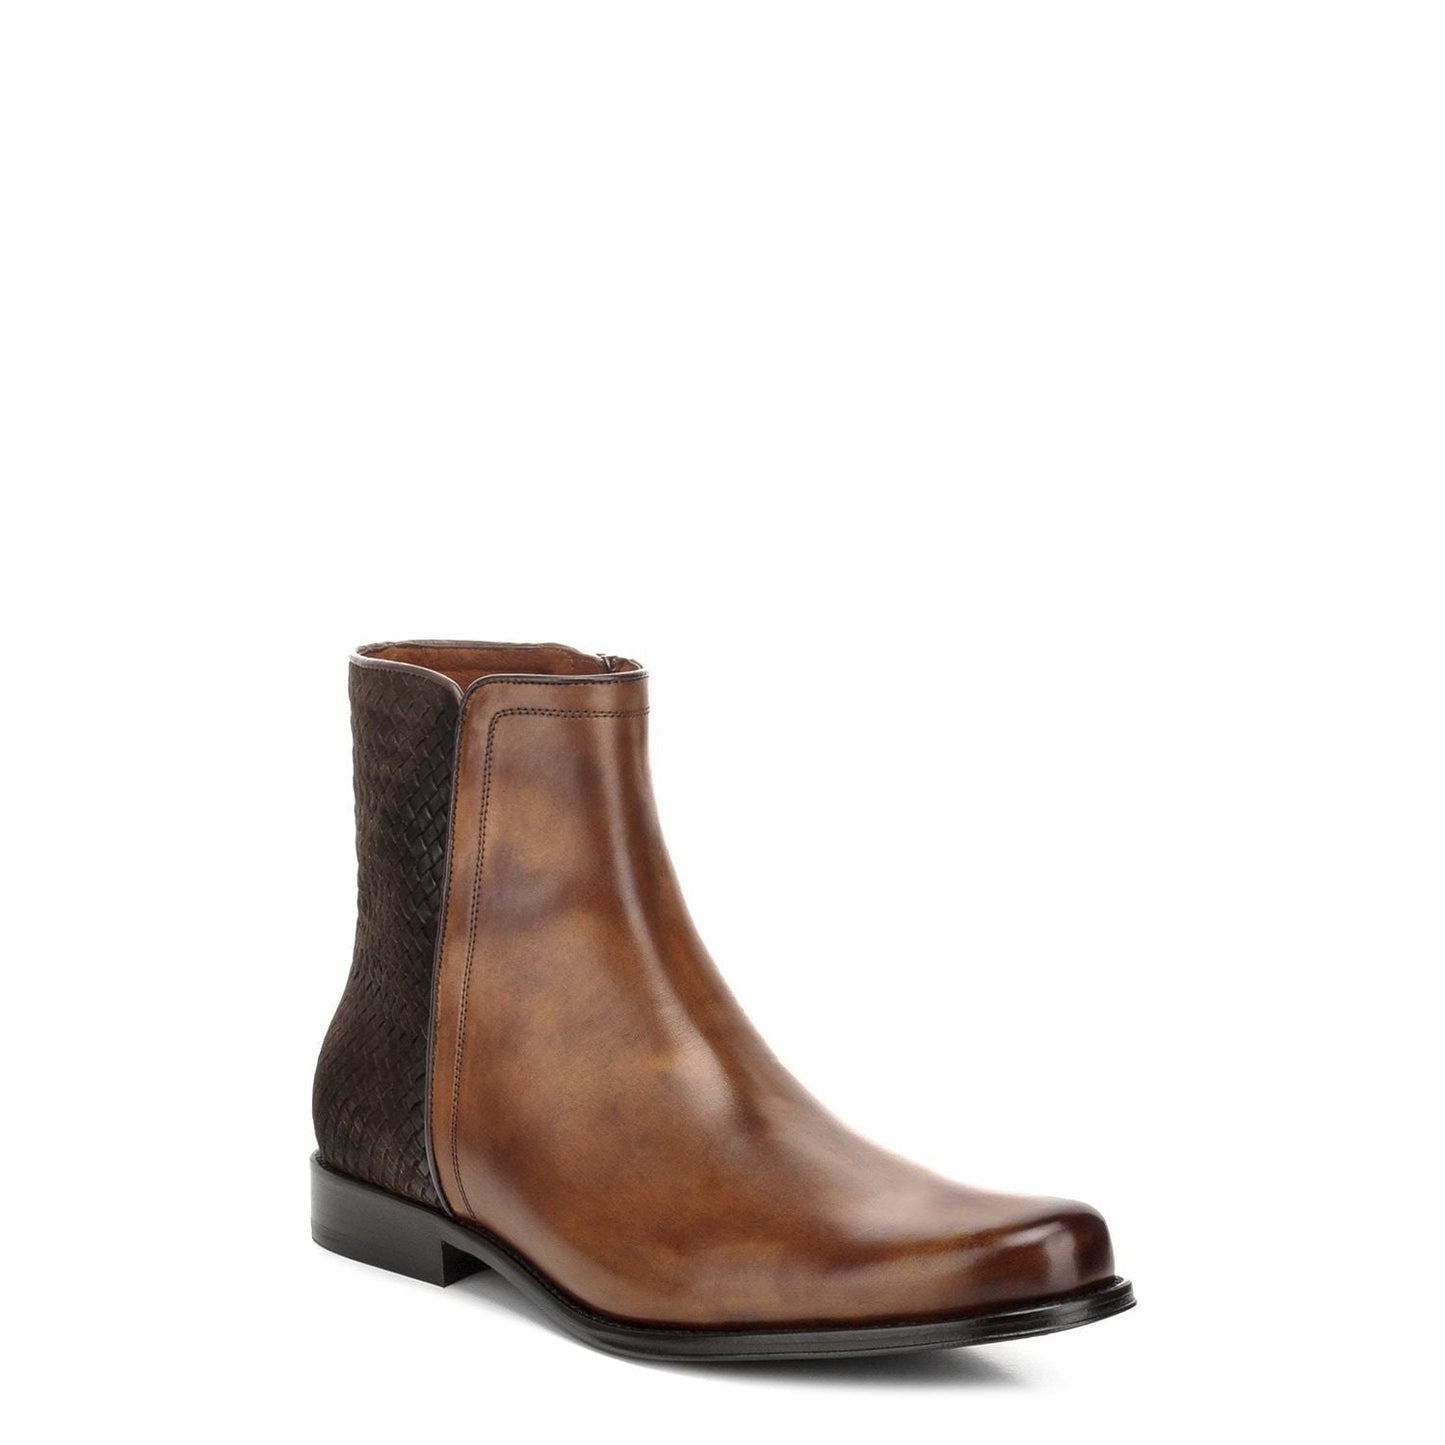 G23TVUE - Cuadra maple dress casual calfskin leather ankle boots for men-FRANCO CUADRA-Kuet-Cuadra-Boots